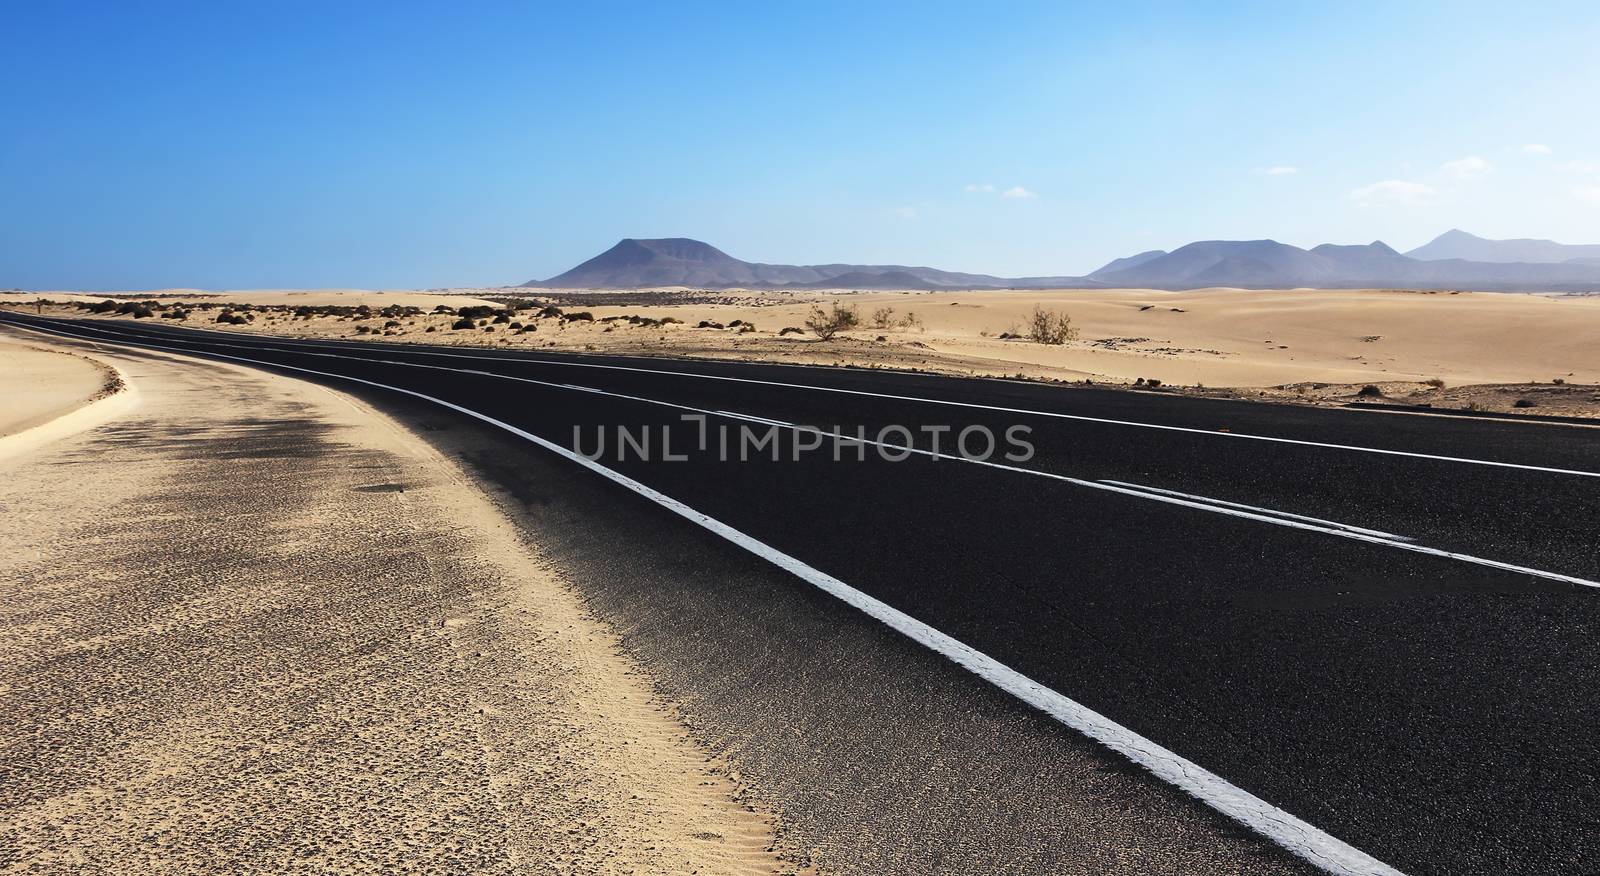 Winding road through the dunes of Corralejo desert with volcano in the background, in Fuerteventura, Canary Islands, Spain.